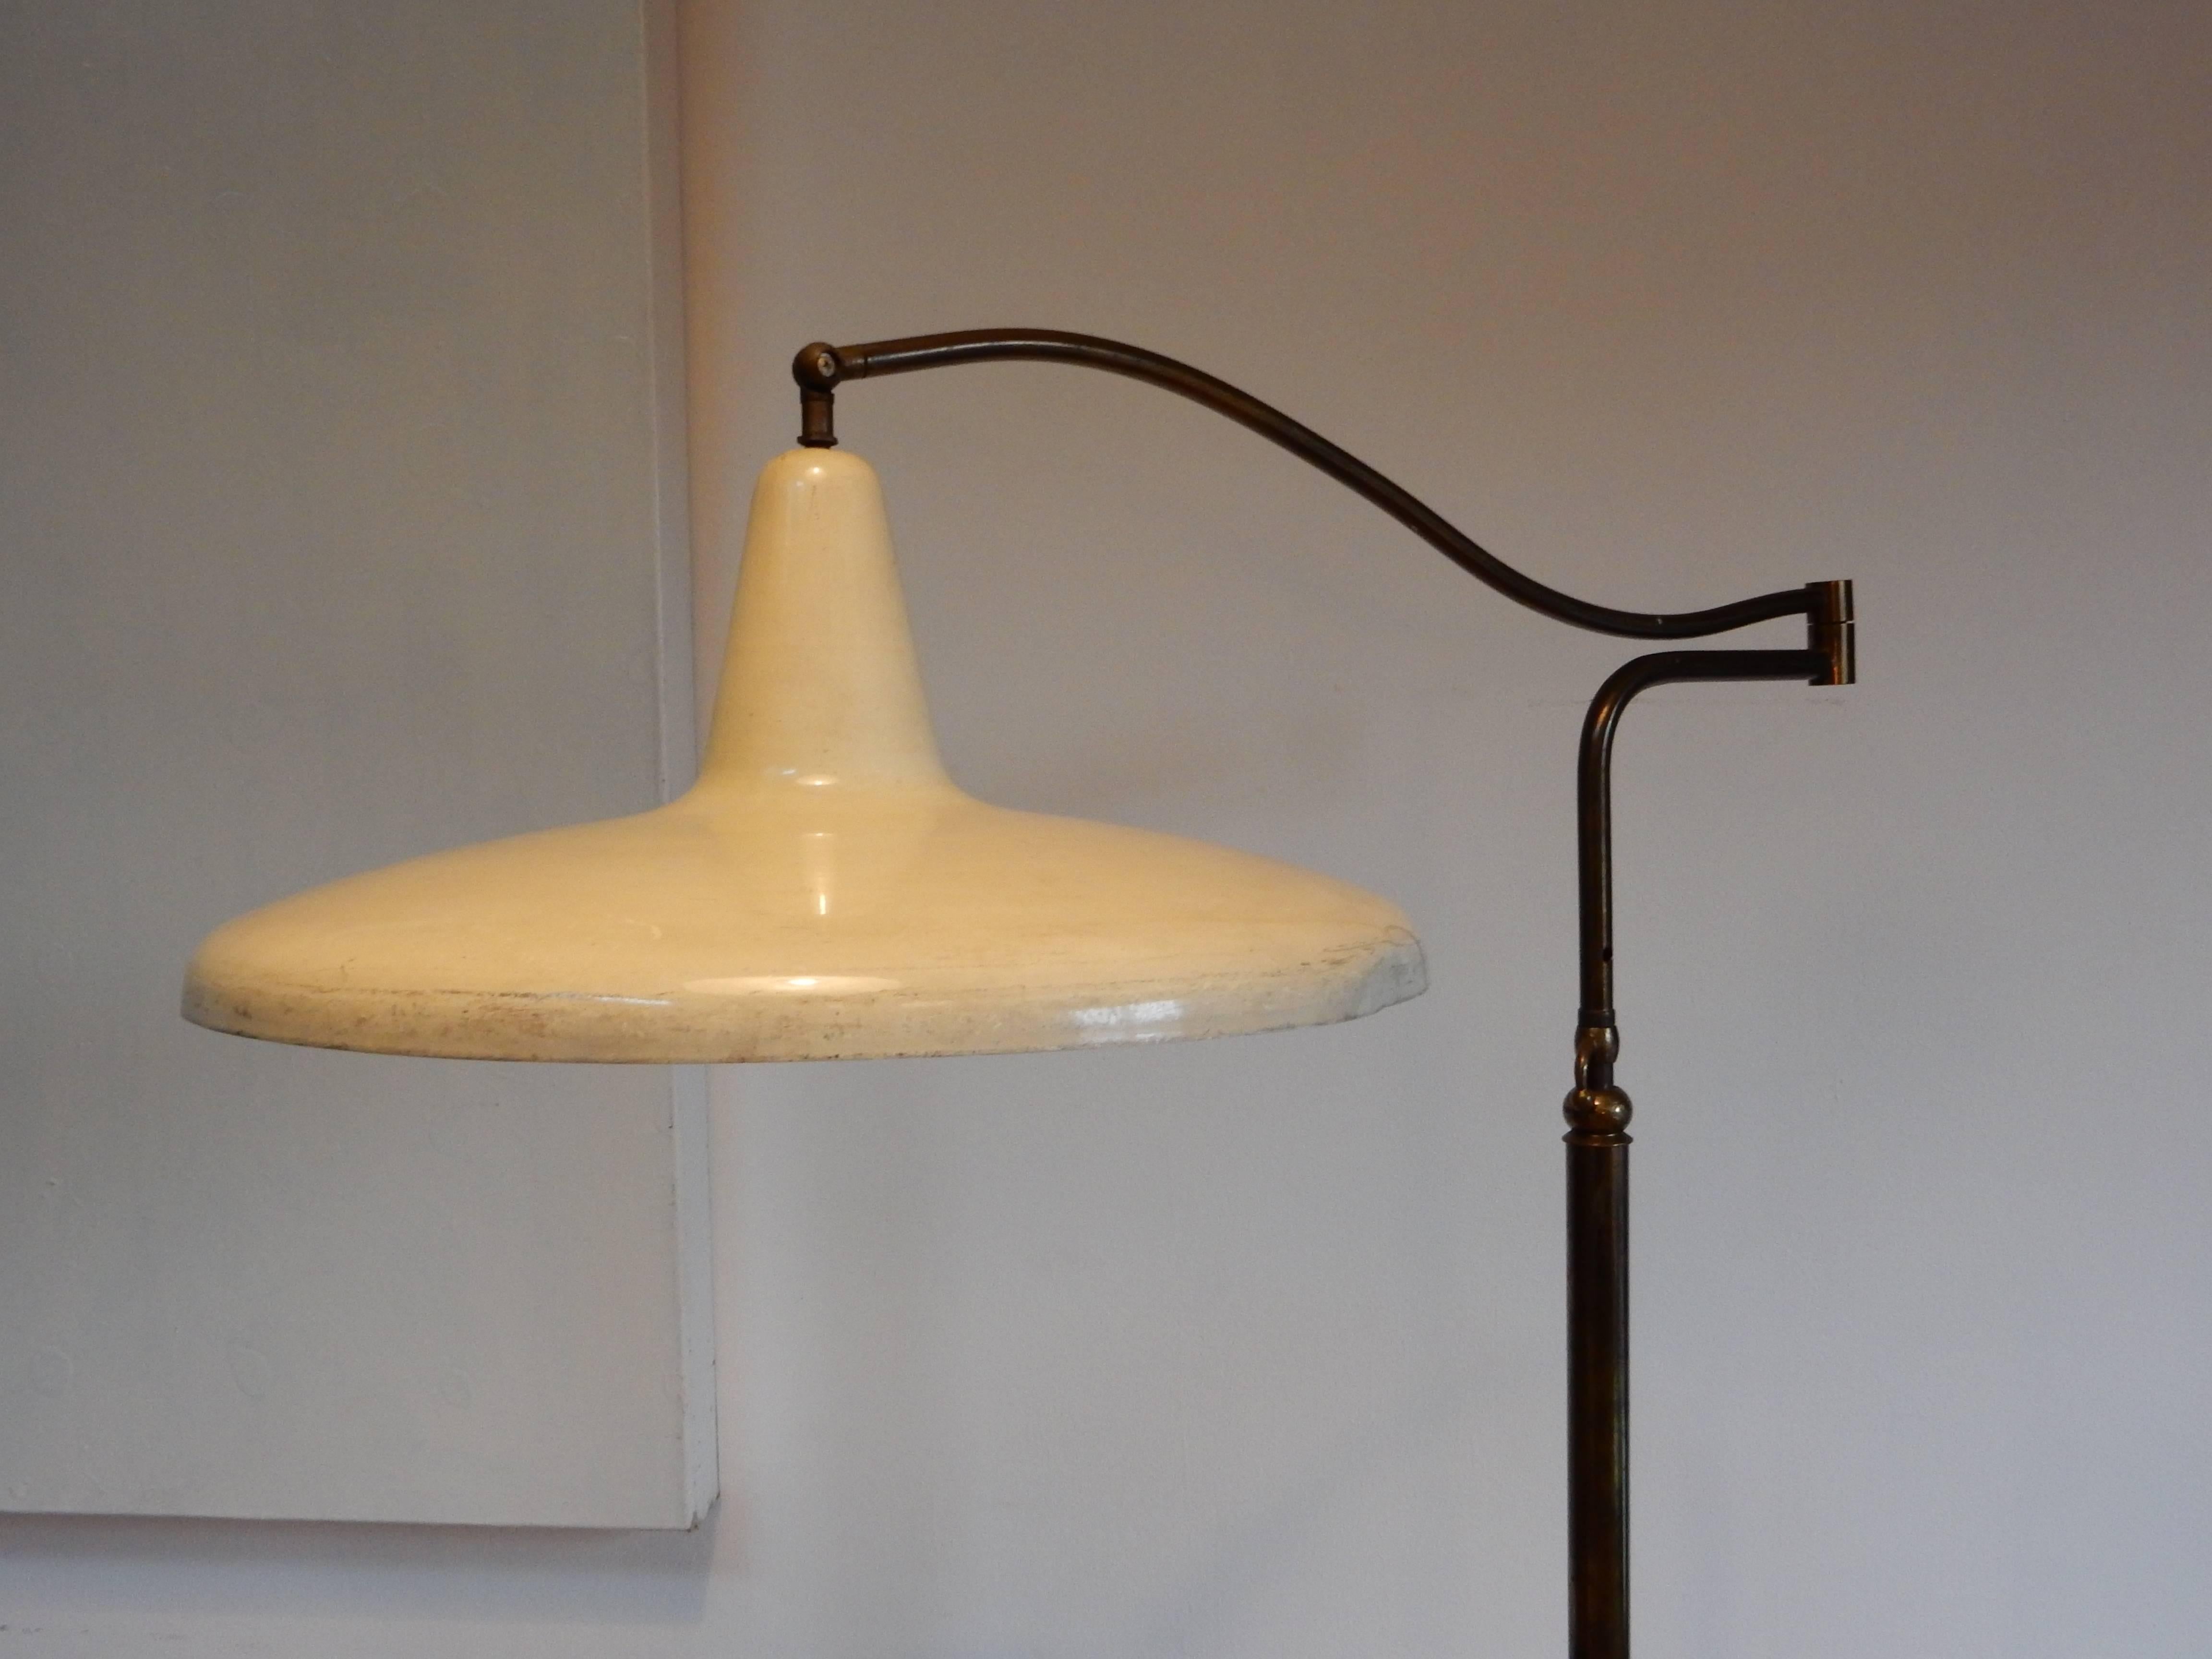 An italian floor lamp made of brass and white laCquered steel in original condition attribued to Stilnovo